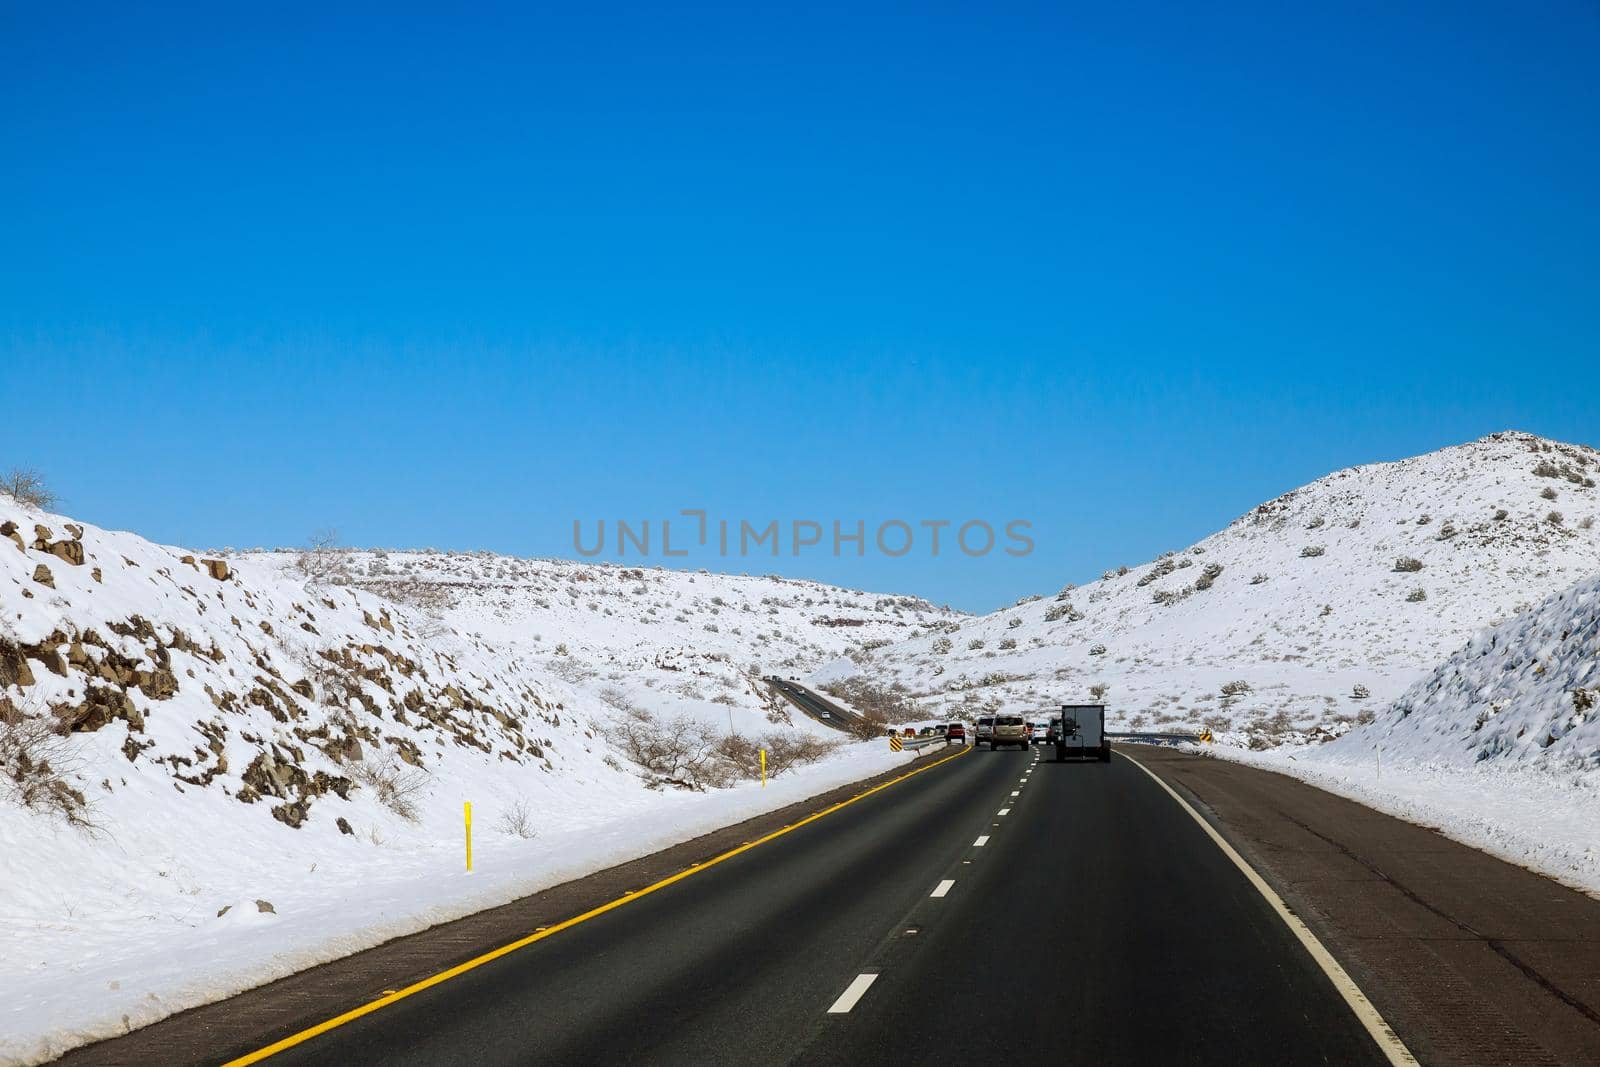 Freshly fallen snow Interstate 17 road in Arizona desert after the snowstorm by ungvar